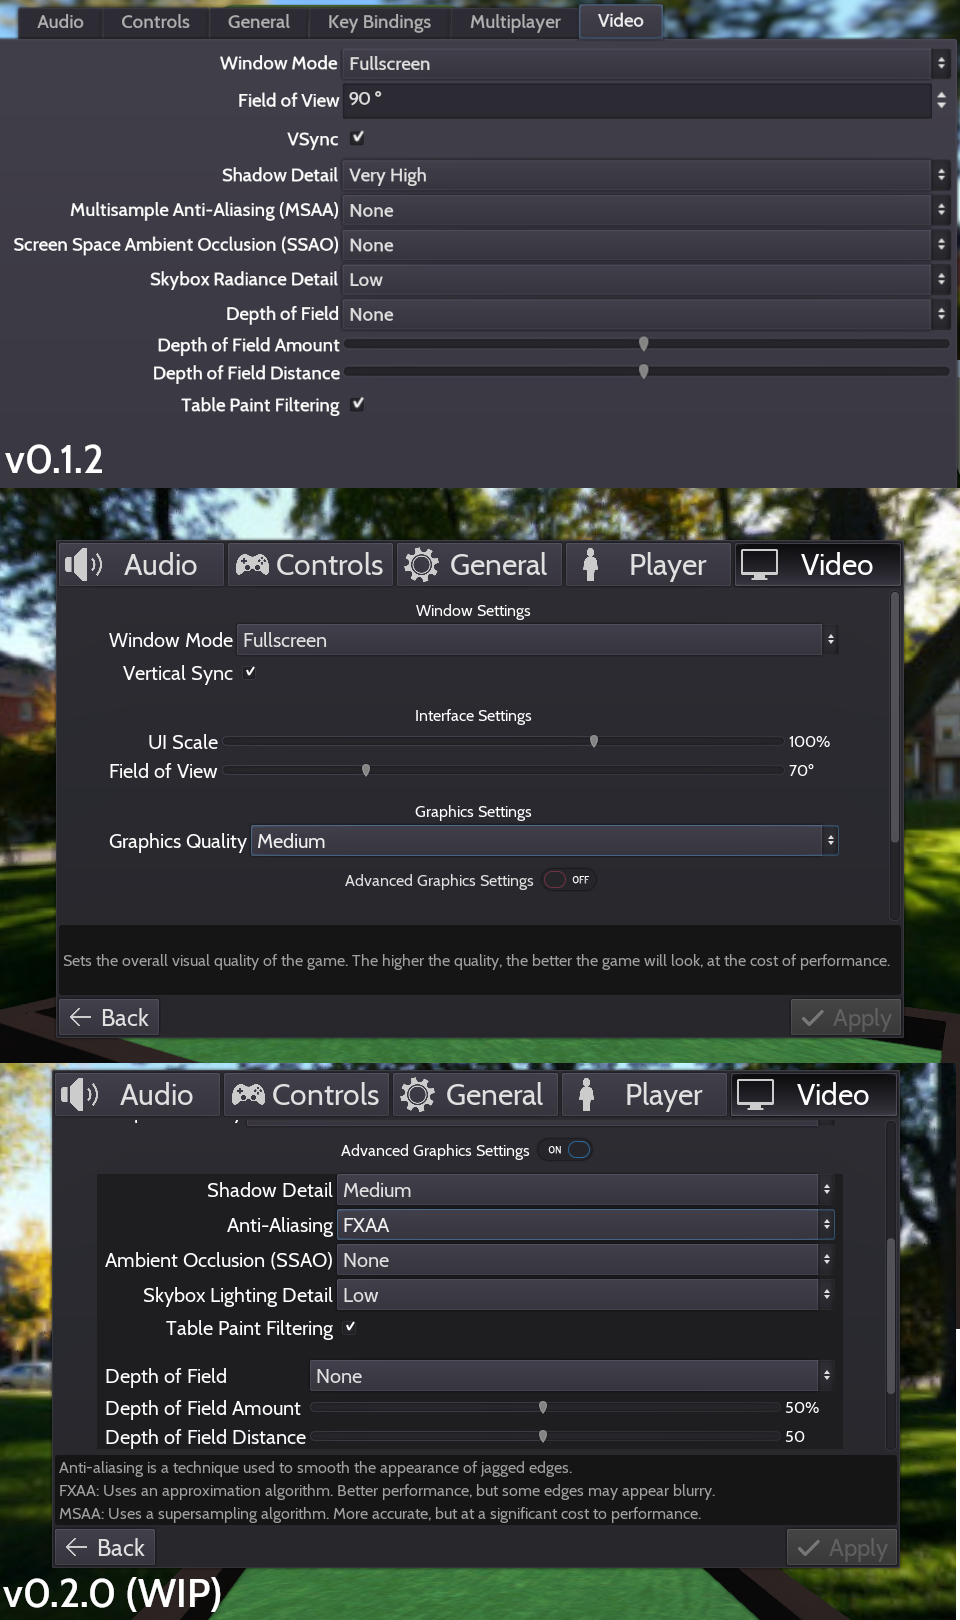 A comparison between the v0.1.2 video settings and the v0.2.0 ones.